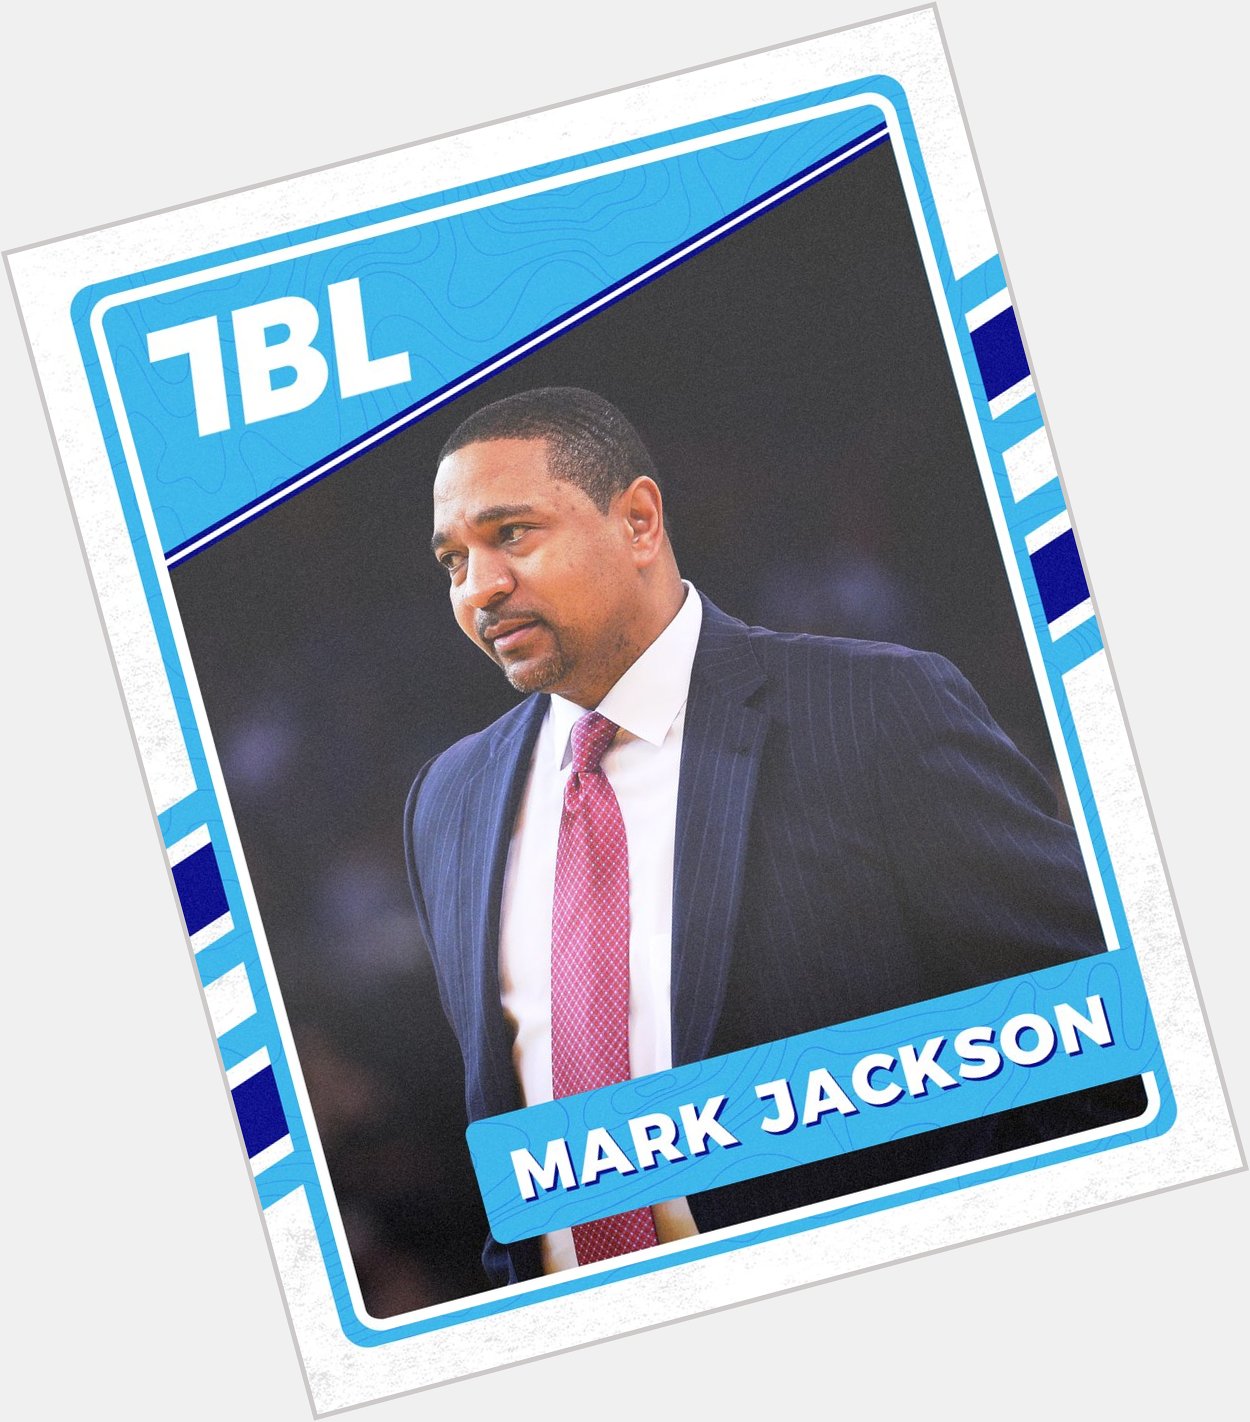 Happy birthday to player, coach, *and* broadcaster Mark Jackson!  